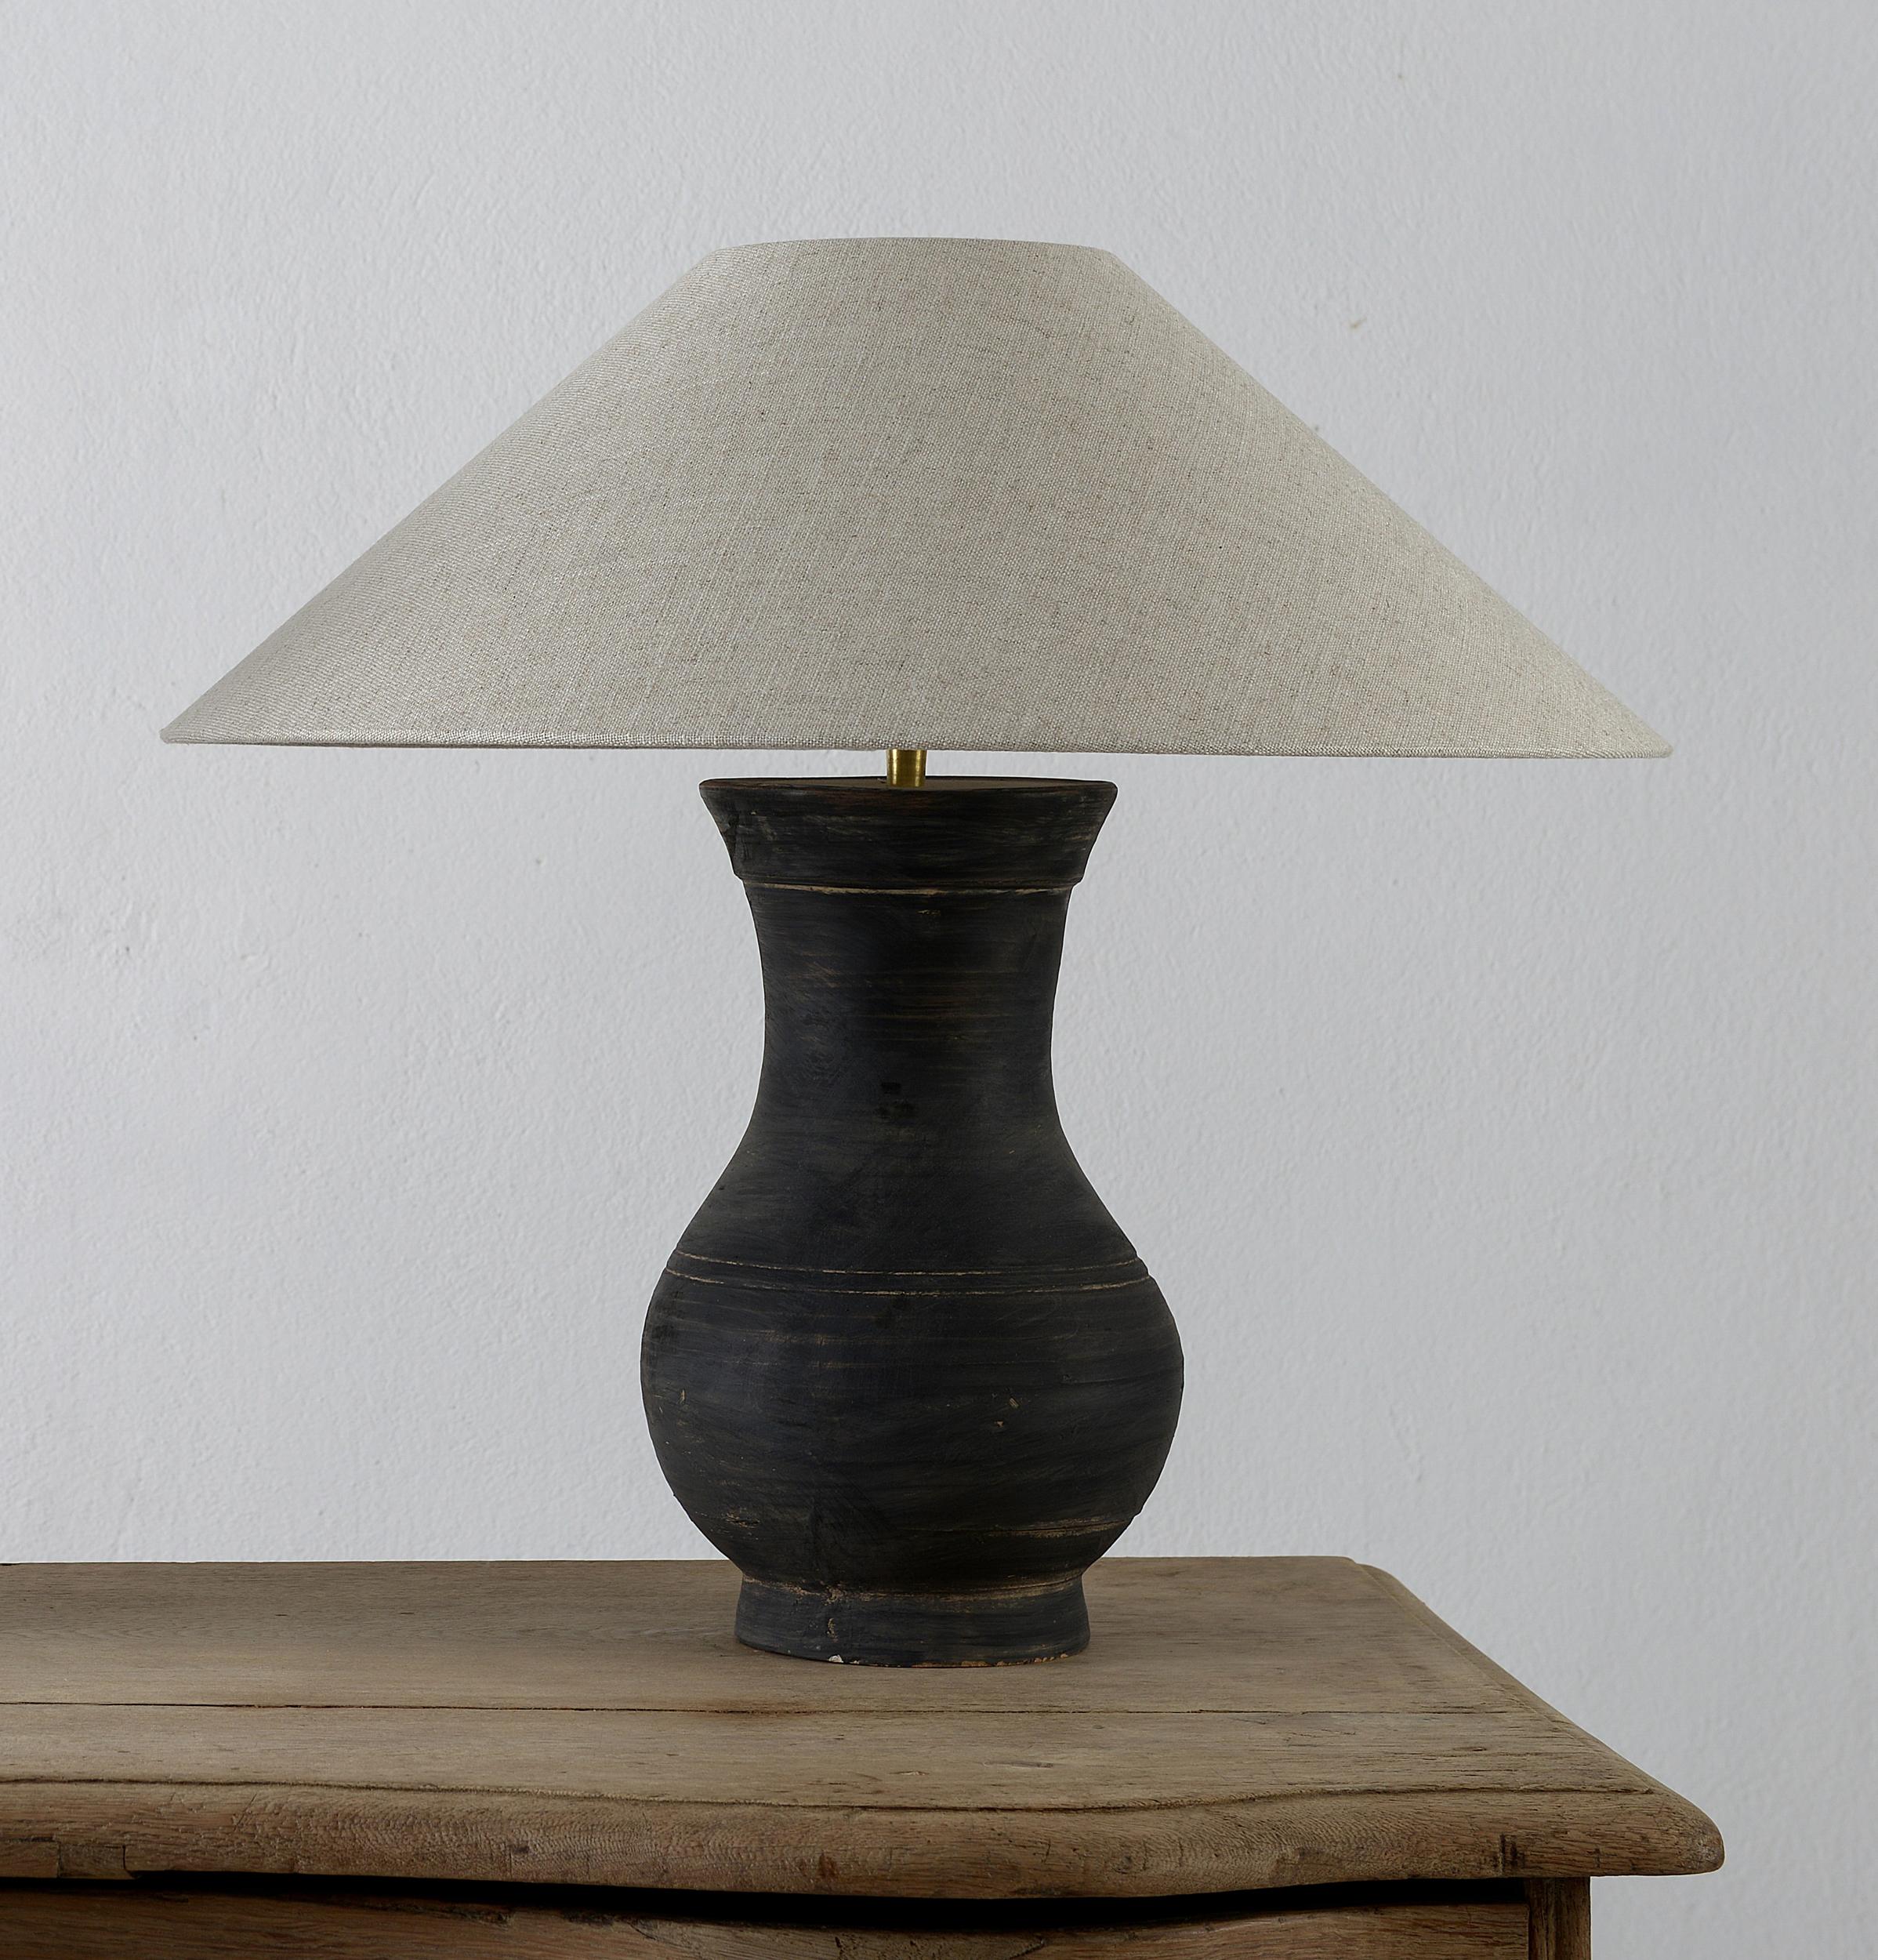 Chinese a single Han Lamp with Handmade Belgian Linen Shades